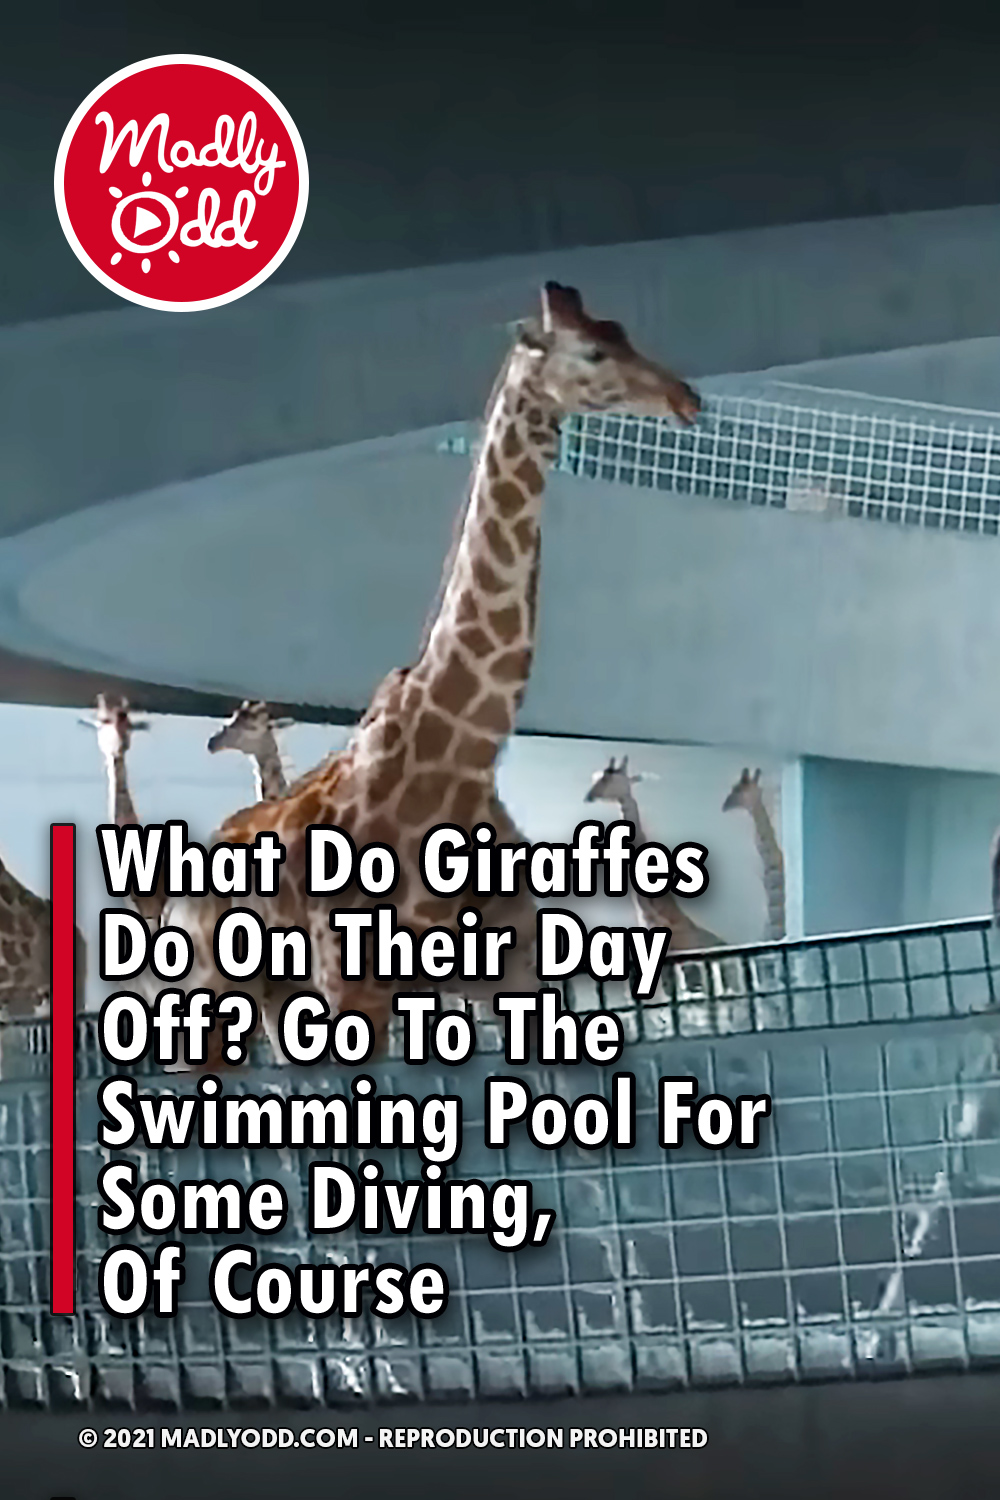 What Do Giraffes Do On Their Day Off? Go To The Swimming Pool For Some Diving, Of Course